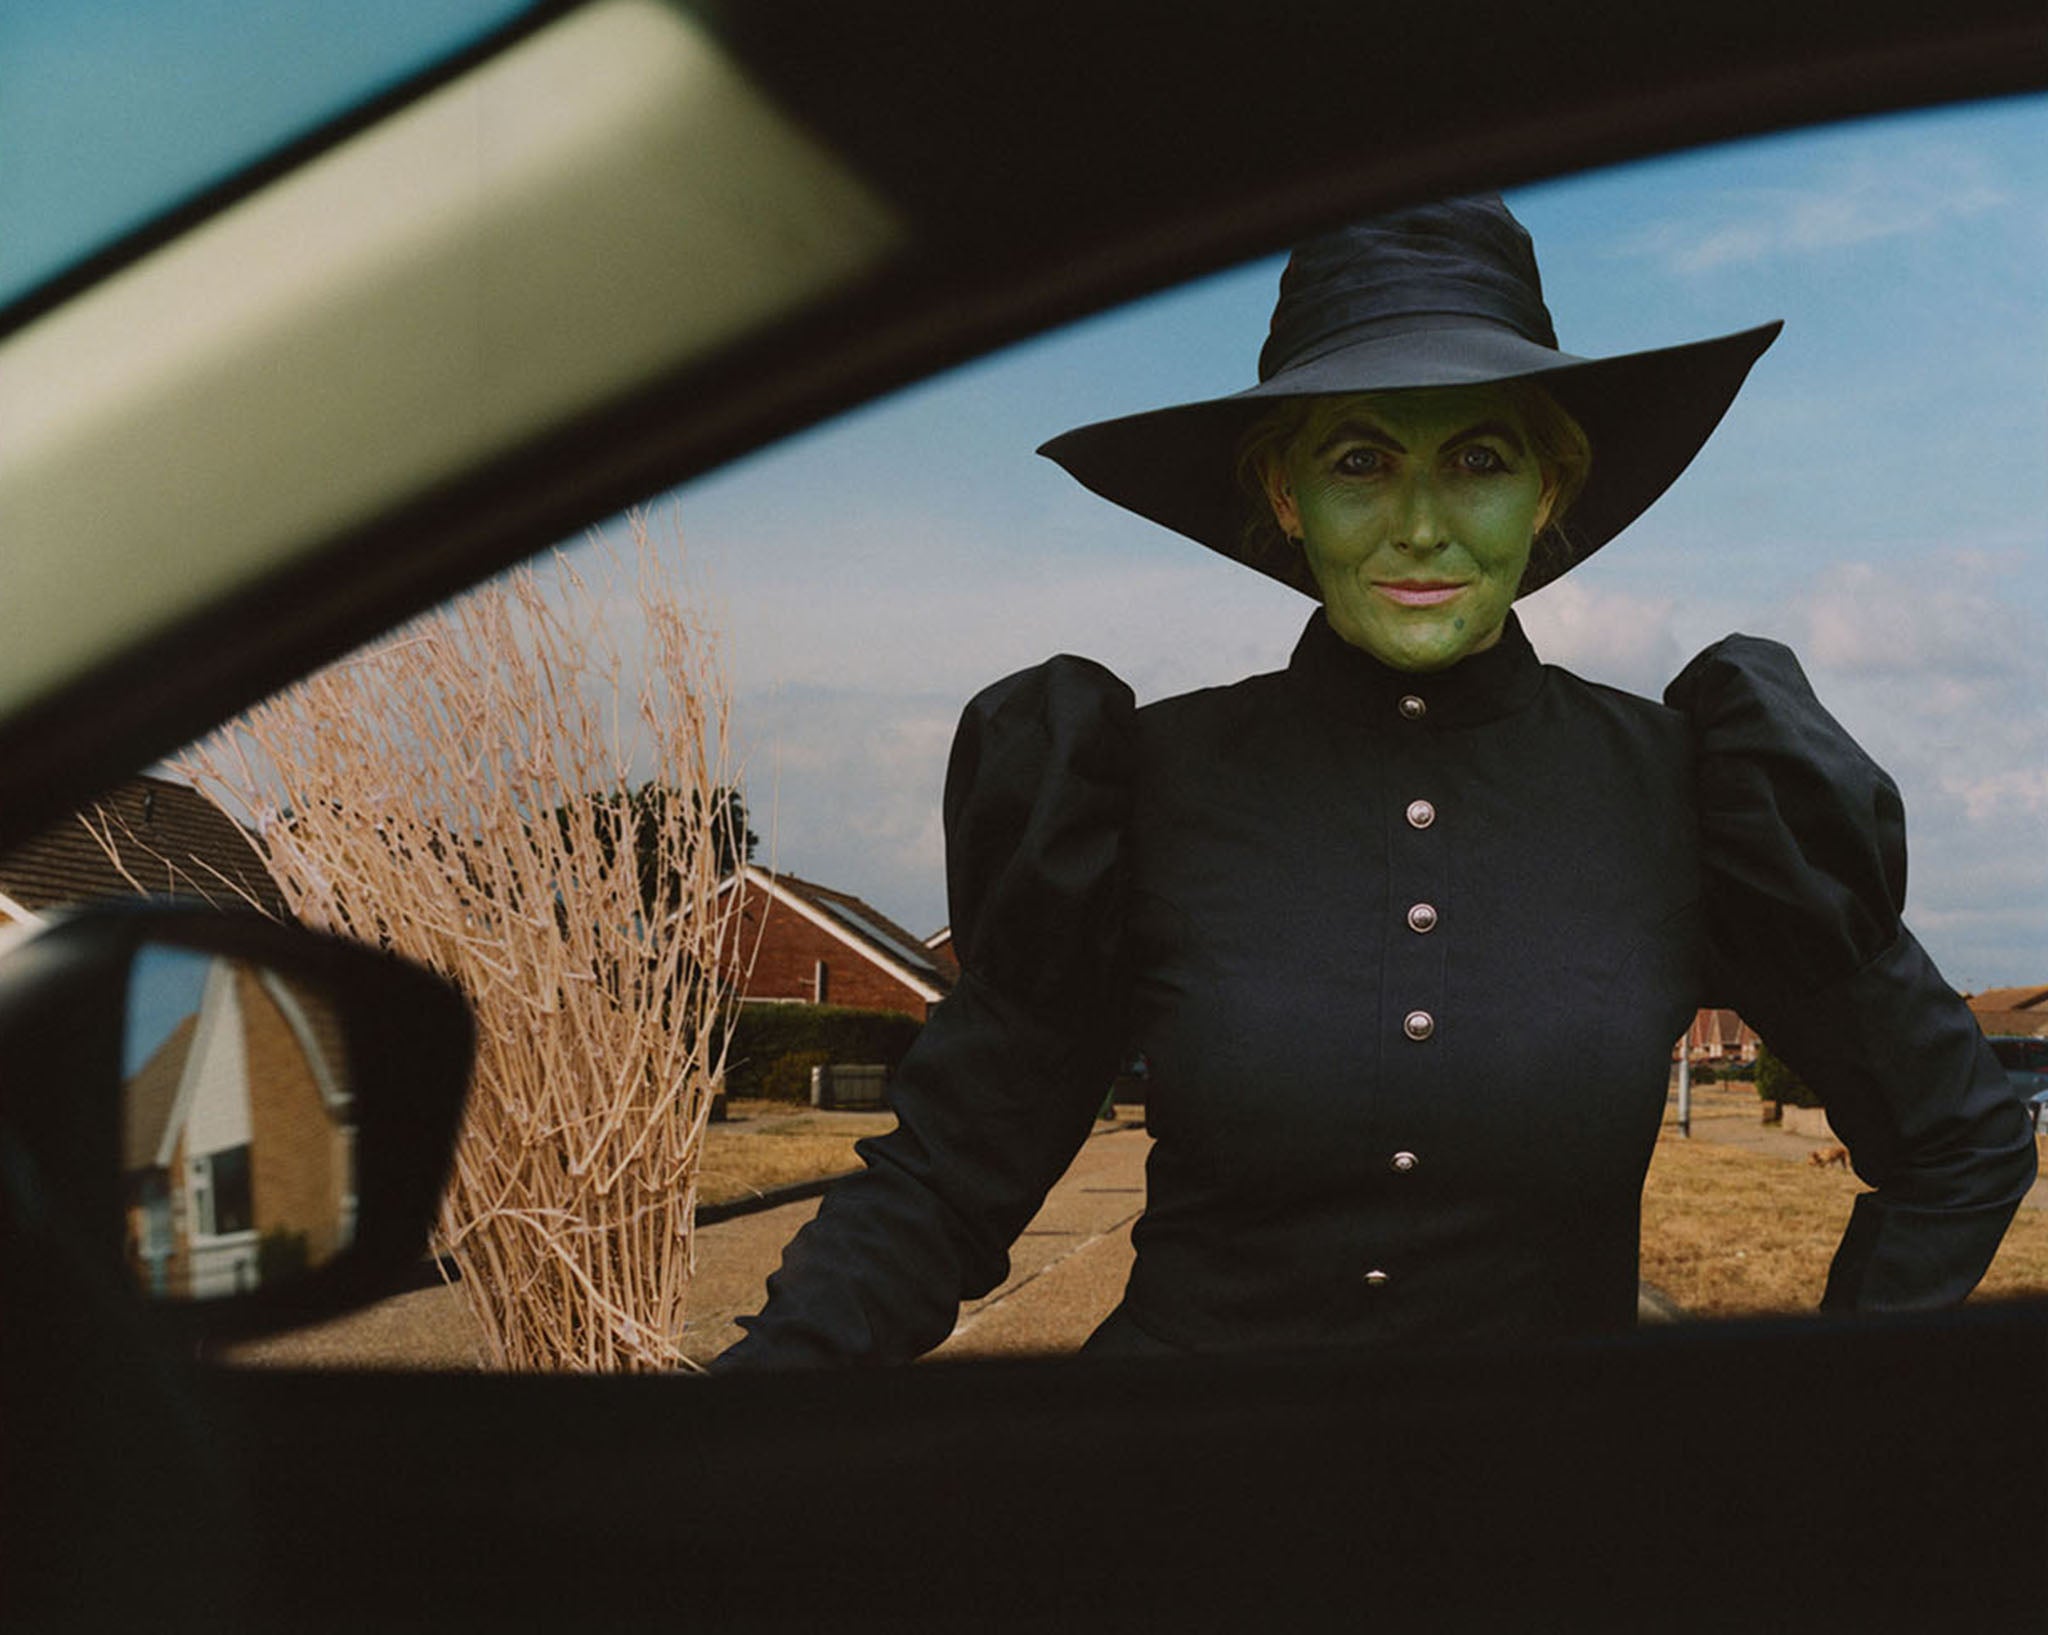 The Wicked Witch of the West from ‘The Wizard of Oz’, cosplayed by a baby massage teacher and exam invigilator